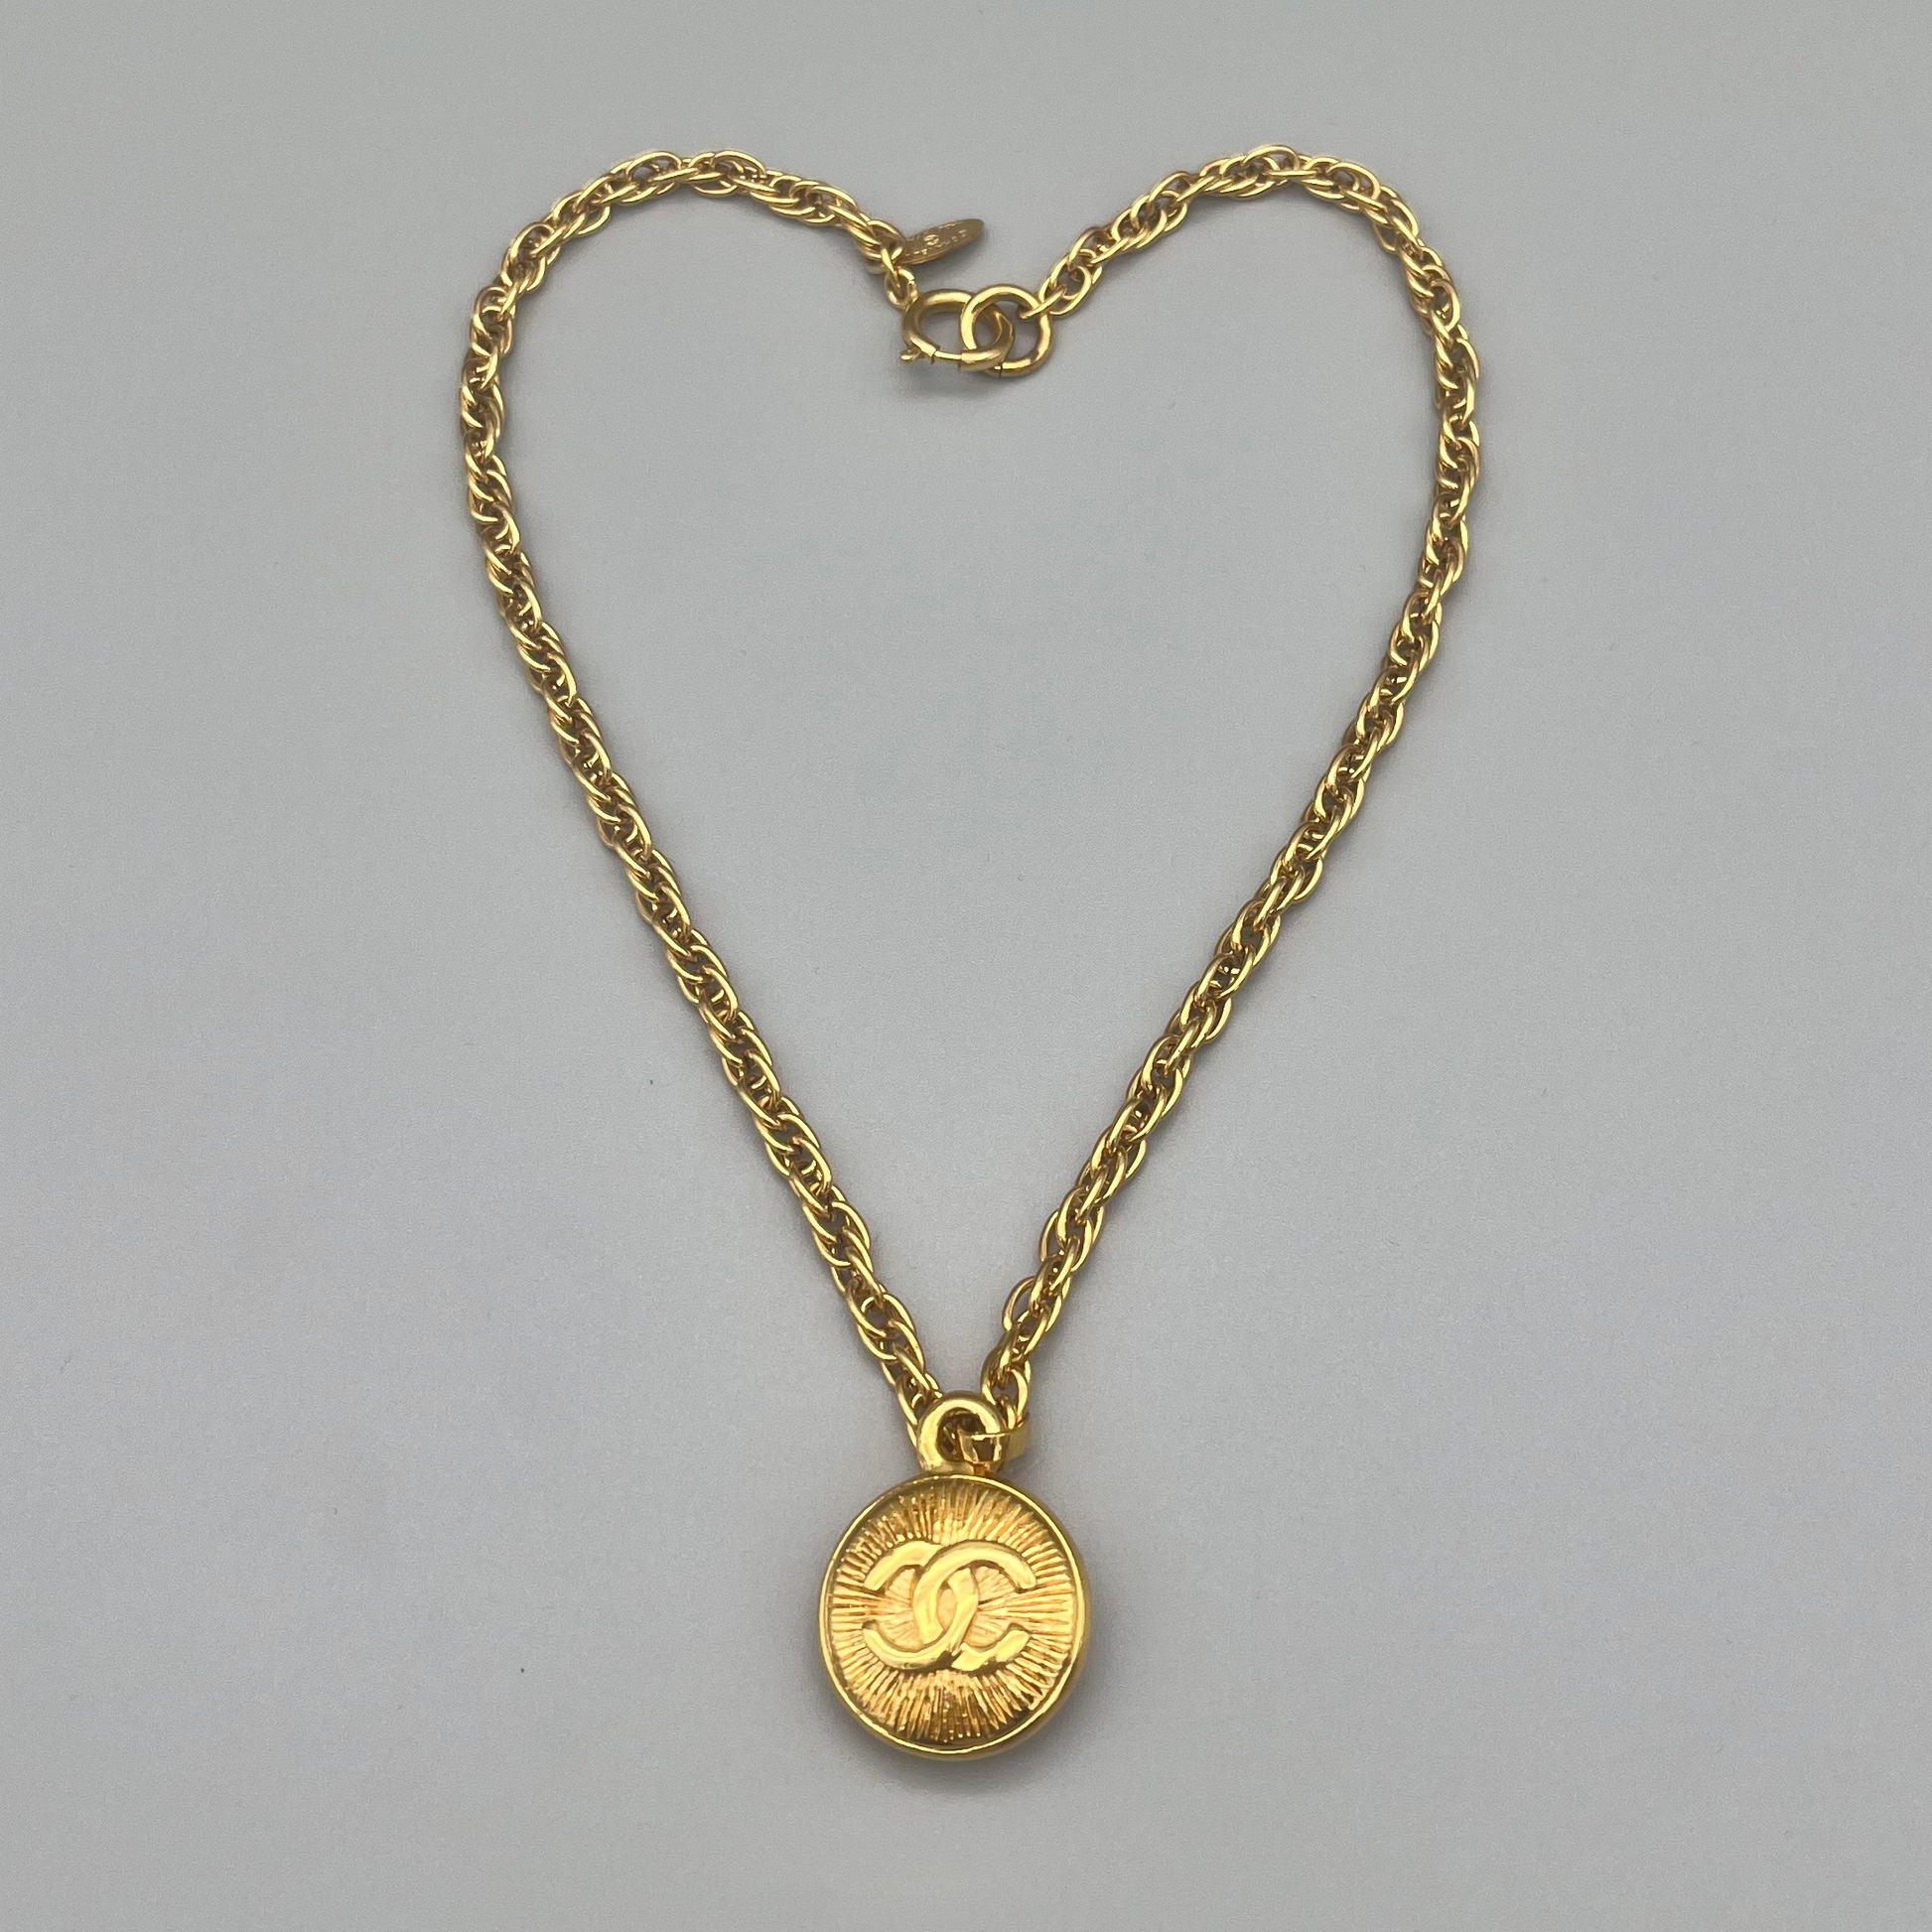 Pre-Owned Chanel Coco Mark Men's Necklace GP Gold (Good) 